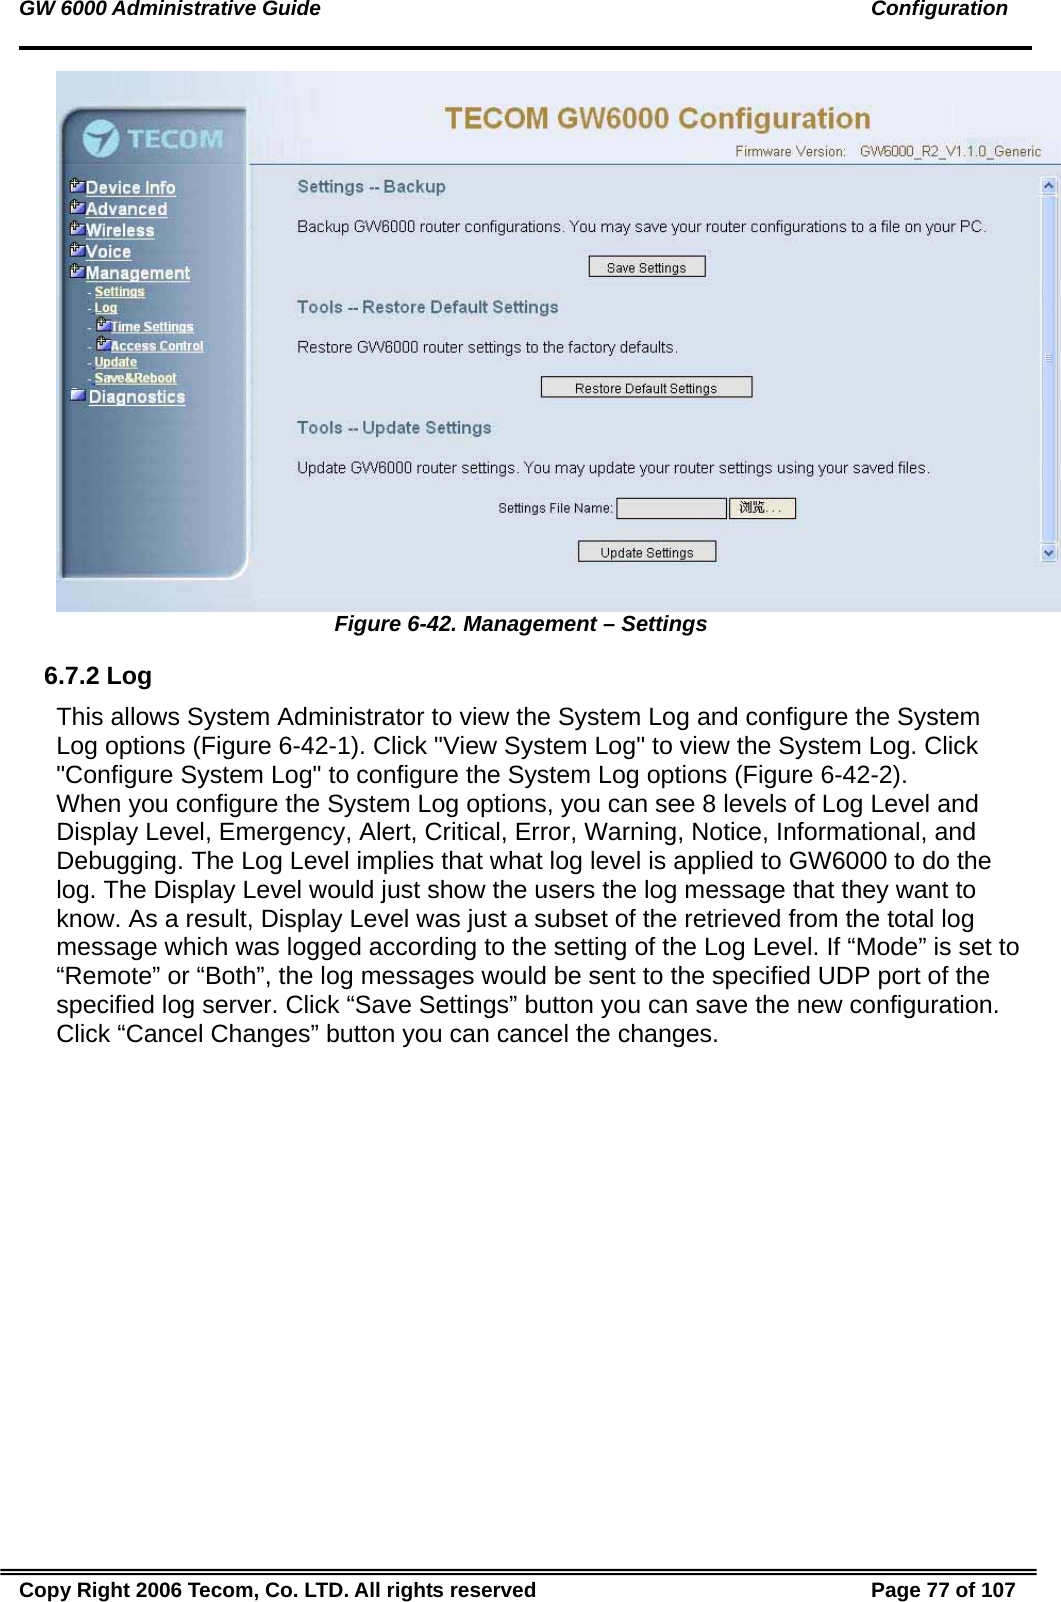 GW 6000 Administrative Guide                                                                                               Configuration  Figure 6-42. Management – Settings 6.7.2 Log This allows System Administrator to view the System Log and configure the System Log options (Figure 6-42-1). Click &quot;View System Log&quot; to view the System Log. Click &quot;Configure System Log&quot; to configure the System Log options (Figure 6-42-2).   When you configure the System Log options, you can see 8 levels of Log Level and Display Level, Emergency, Alert, Critical, Error, Warning, Notice, Informational, and Debugging. The Log Level implies that what log level is applied to GW6000 to do the log. The Display Level would just show the users the log message that they want to know. As a result, Display Level was just a subset of the retrieved from the total log message which was logged according to the setting of the Log Level. If “Mode” is set to “Remote” or “Both”, the log messages would be sent to the specified UDP port of the specified log server. Click “Save Settings” button you can save the new configuration. Click “Cancel Changes” button you can cancel the changes.  Copy Right 2006 Tecom, Co. LTD. All rights reserved  Page 77 of 107 